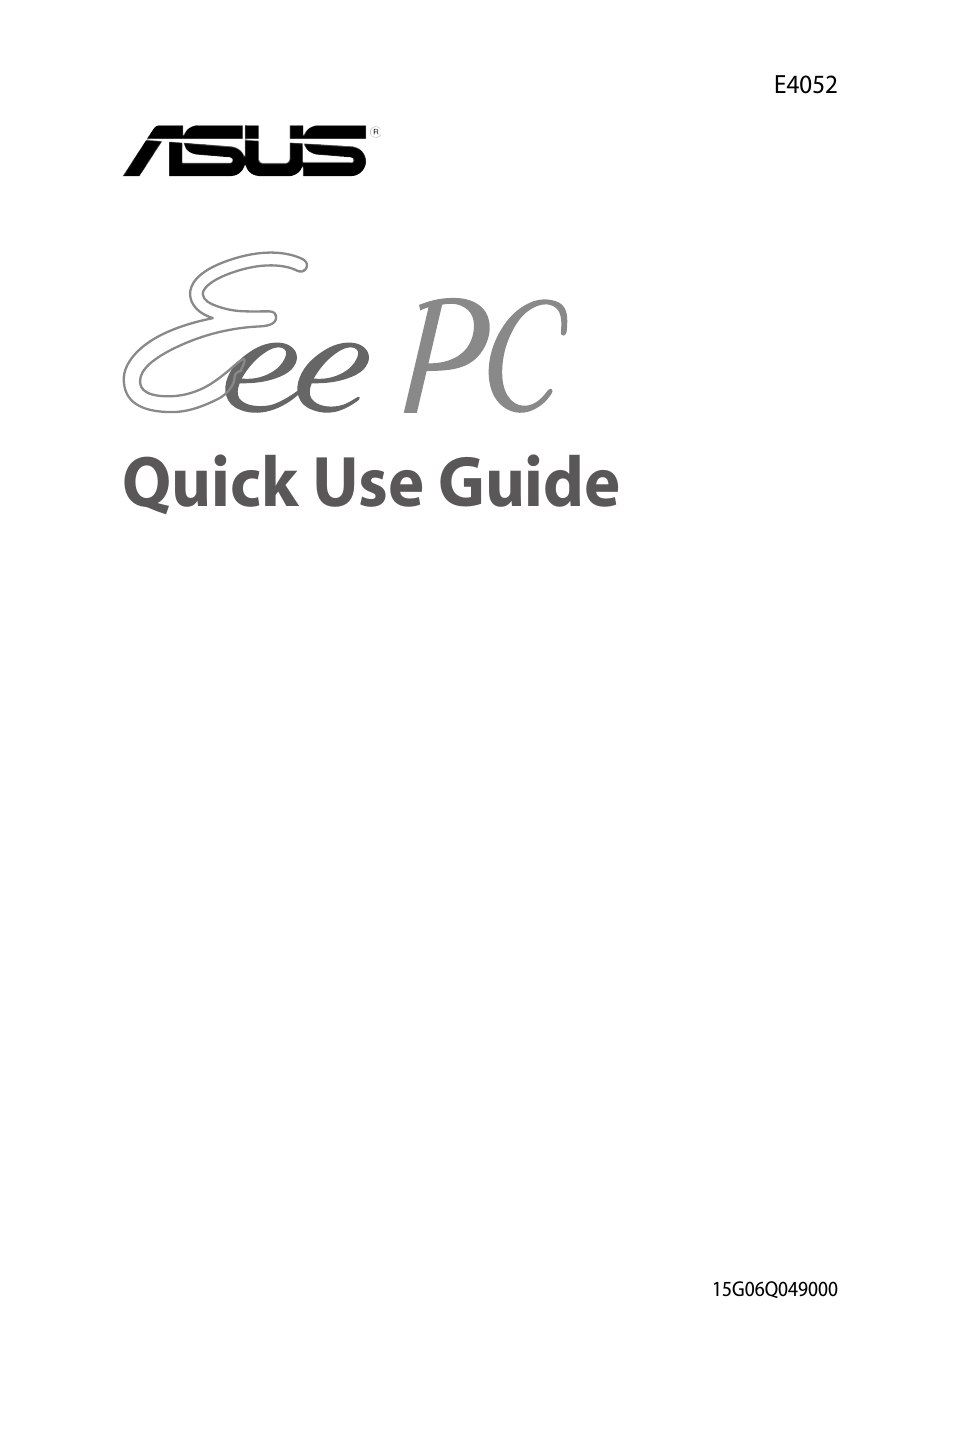 Eee PC S101/Linux (Page 1)